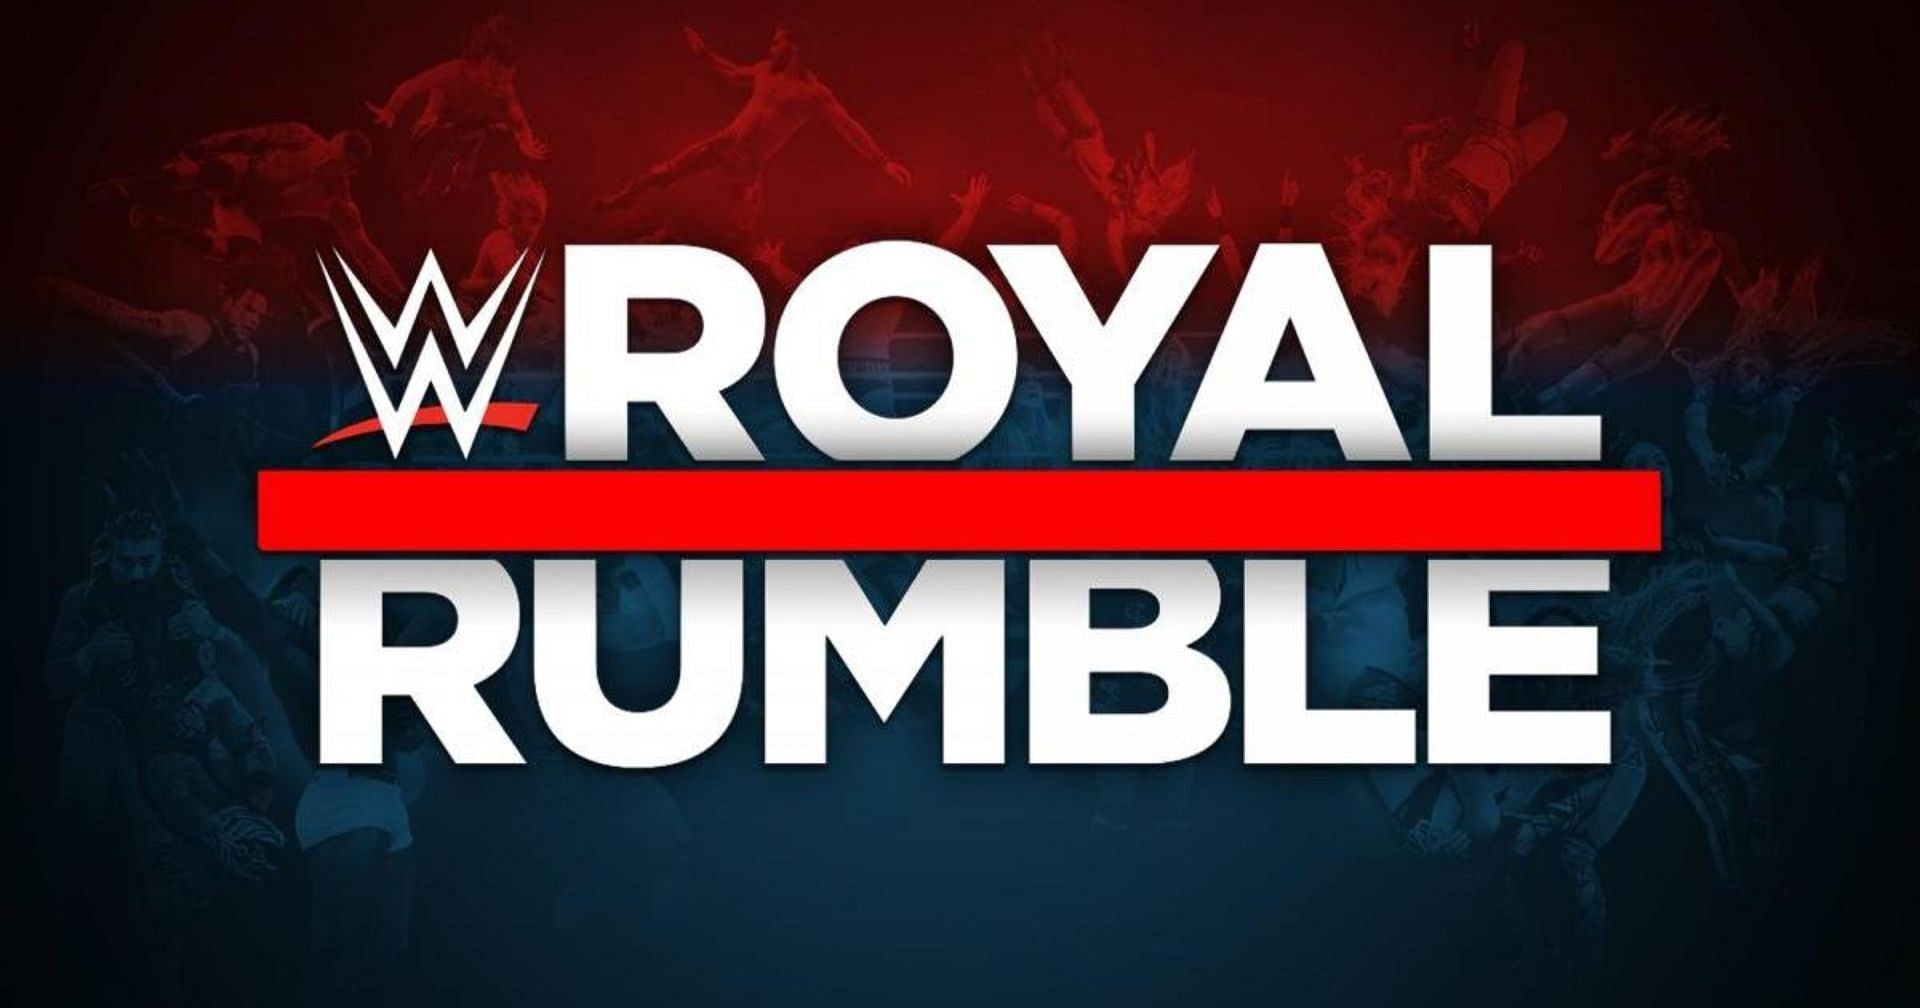 The Royal Rumble is one of WWE